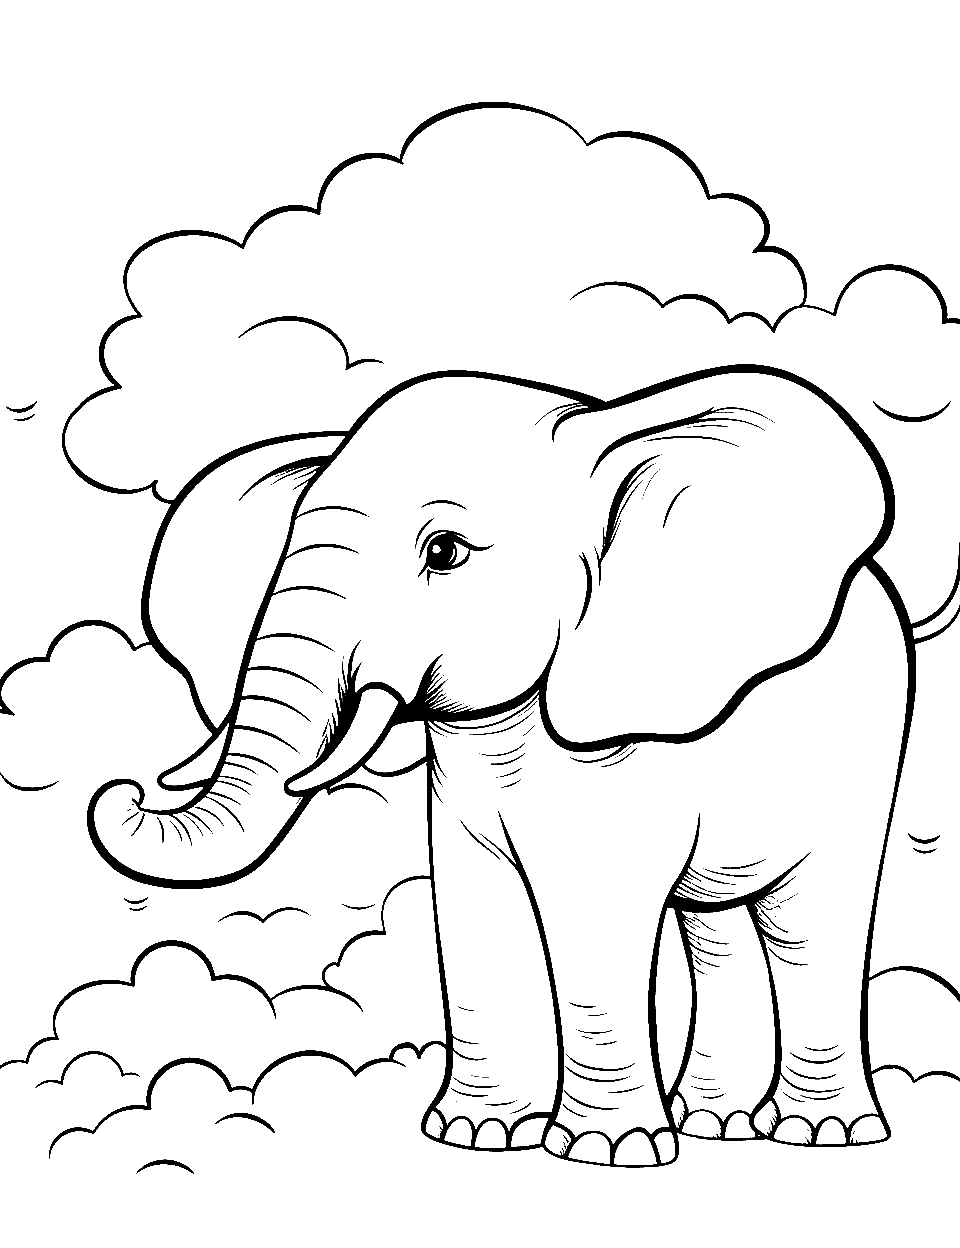 Elephant Dream Clouds Coloring Page - An elephant among fluffy clouds.